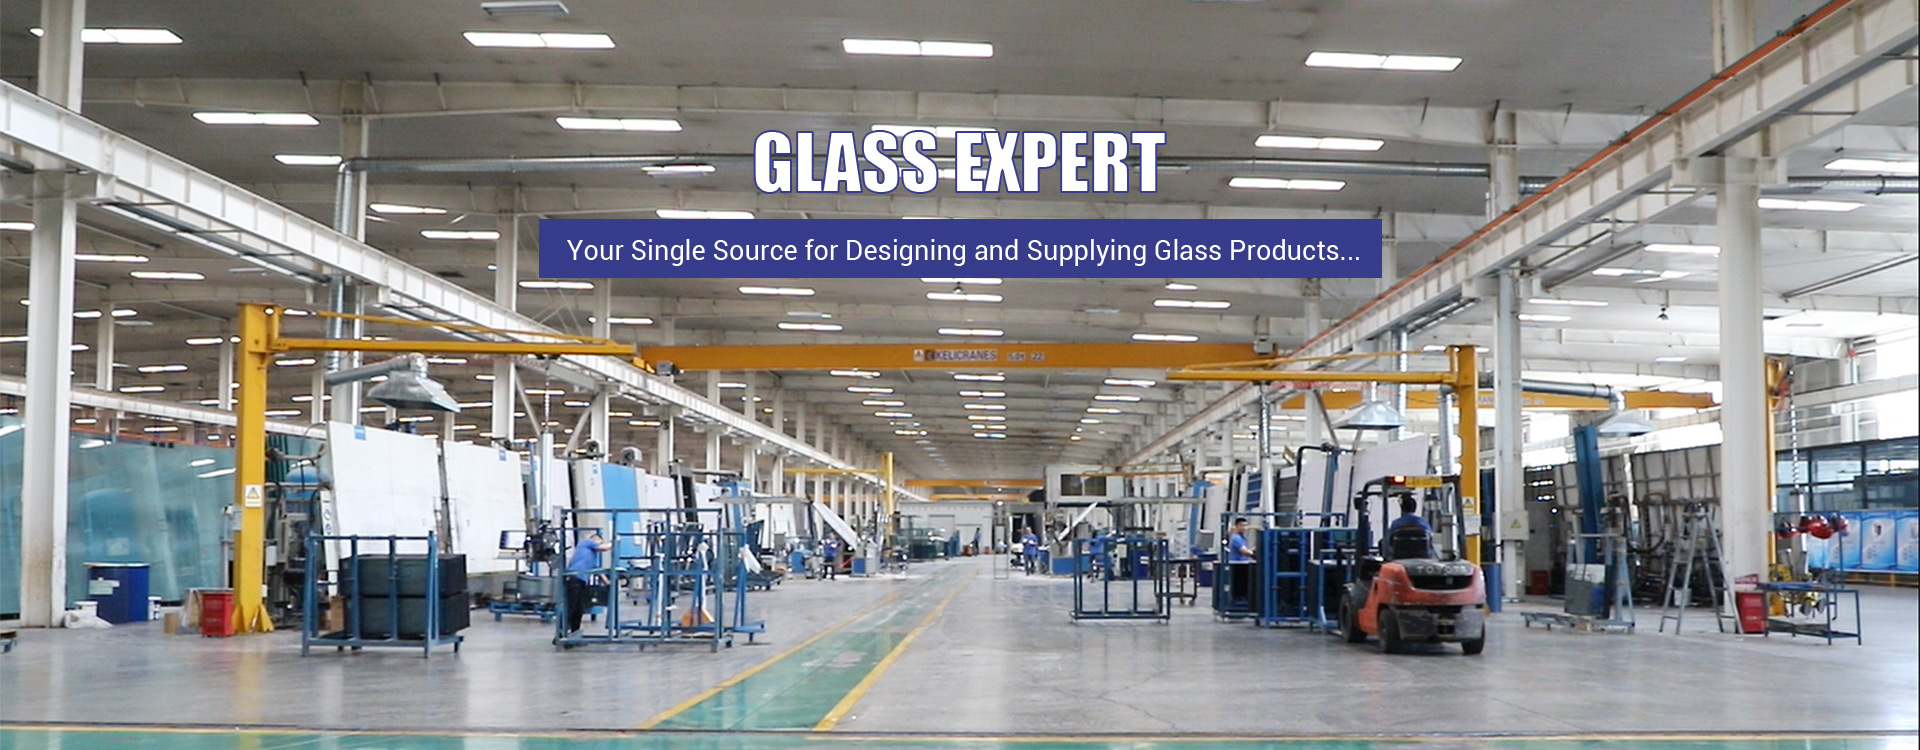 Roof Dome Glass Manufacturer